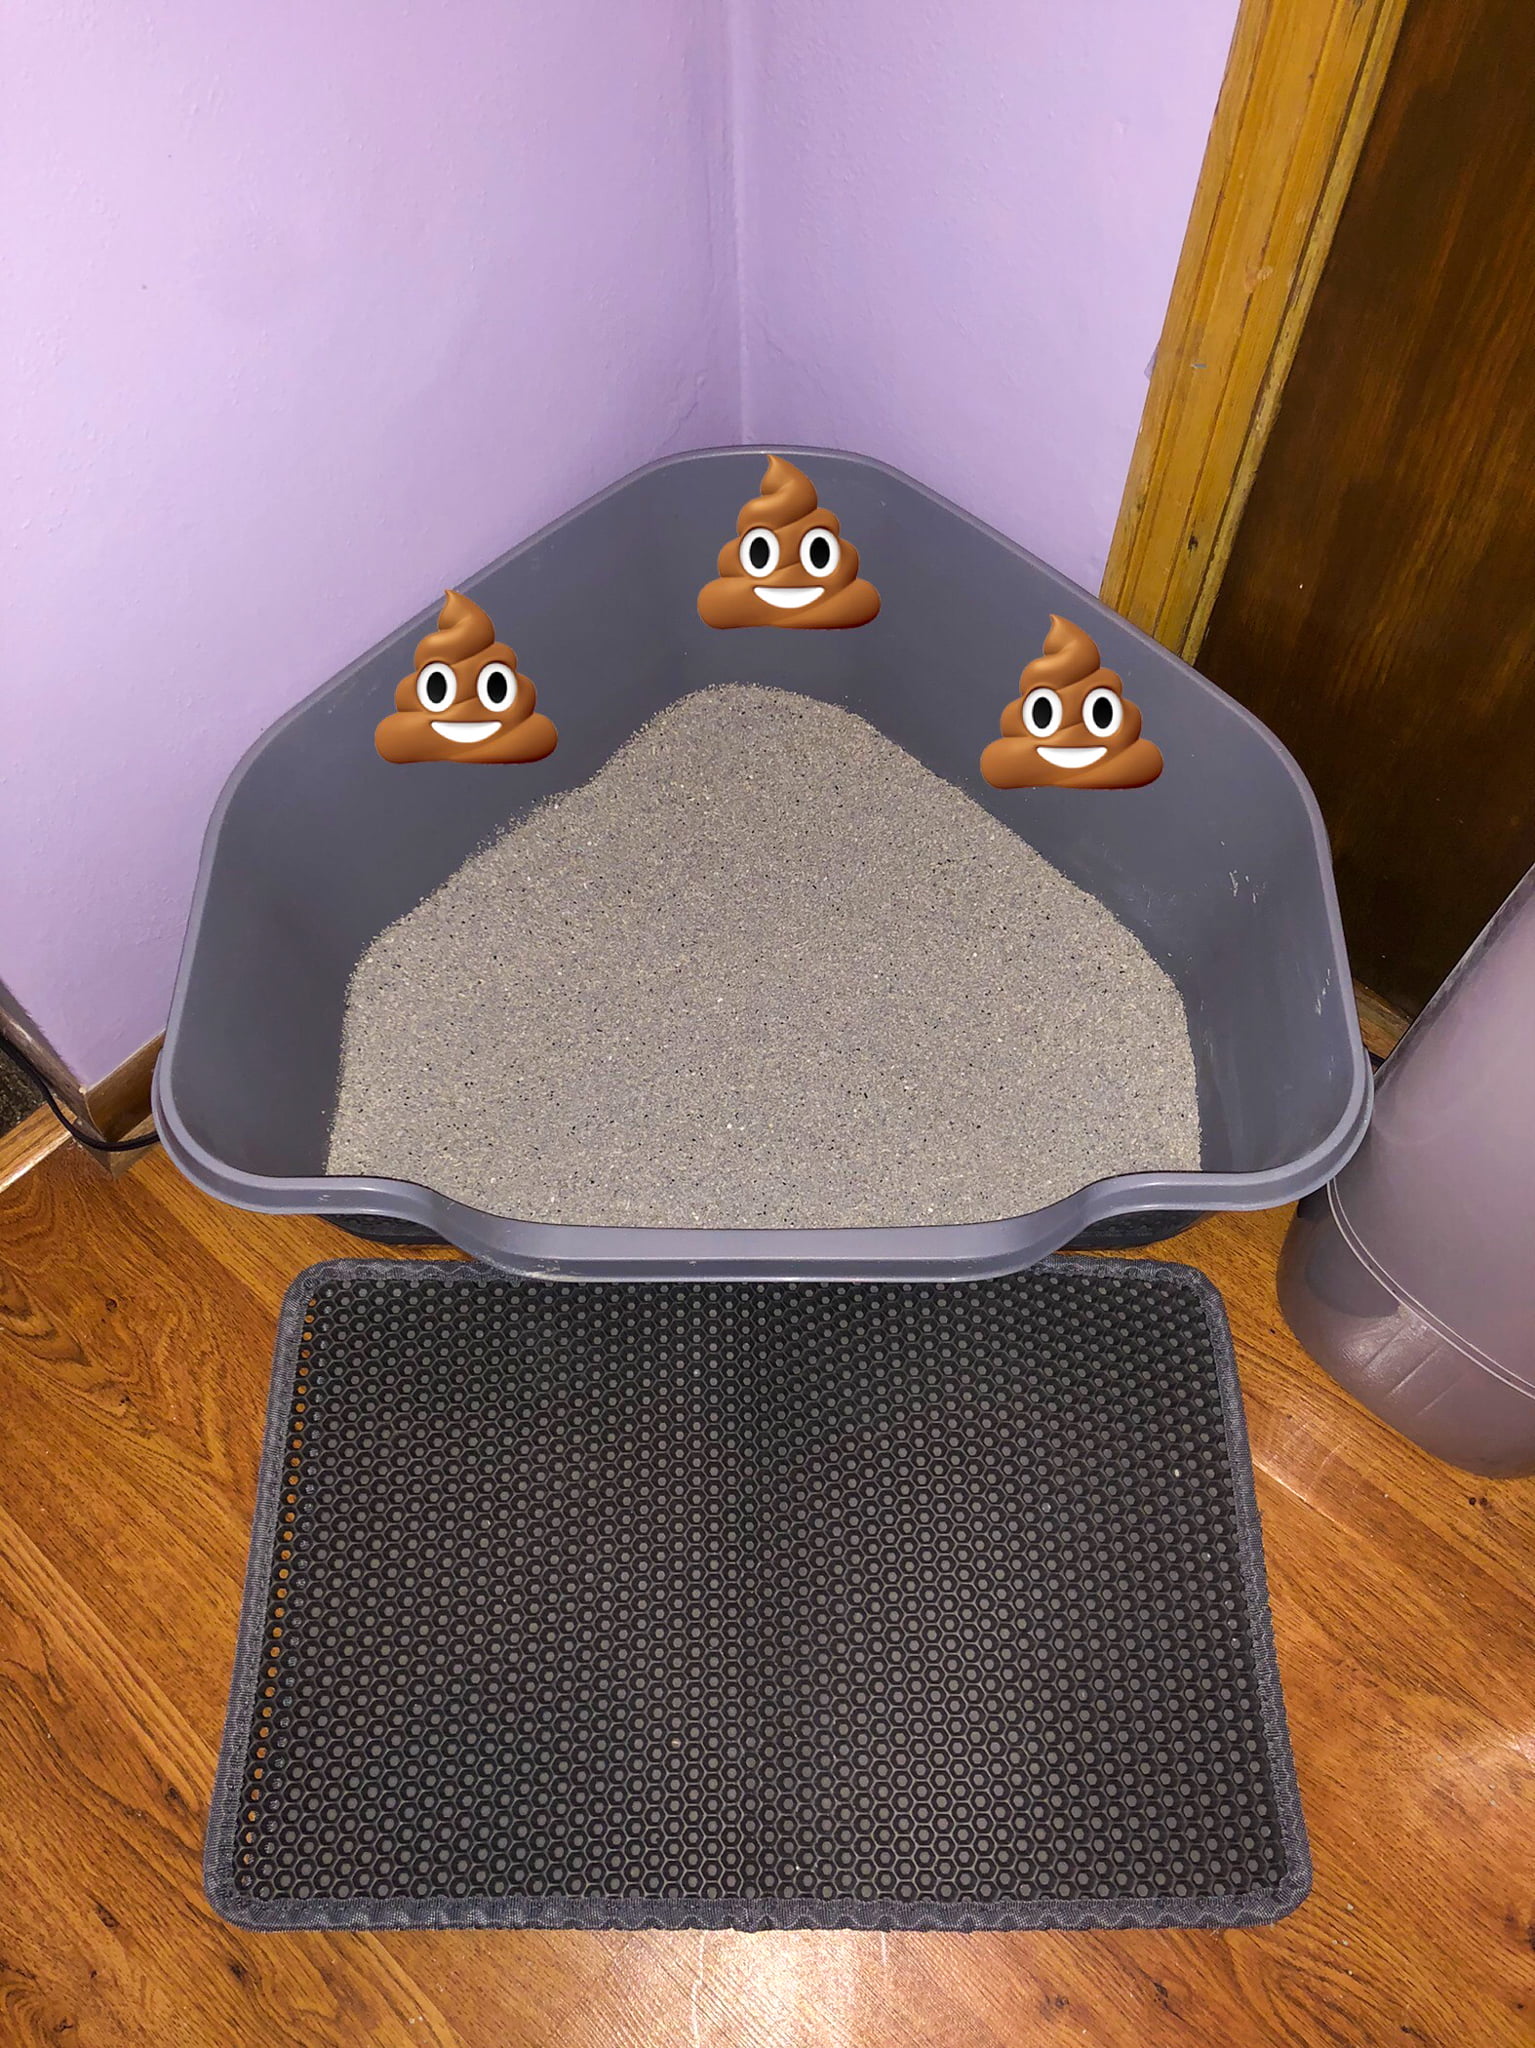 Poop emojis on the sides of the litter box.